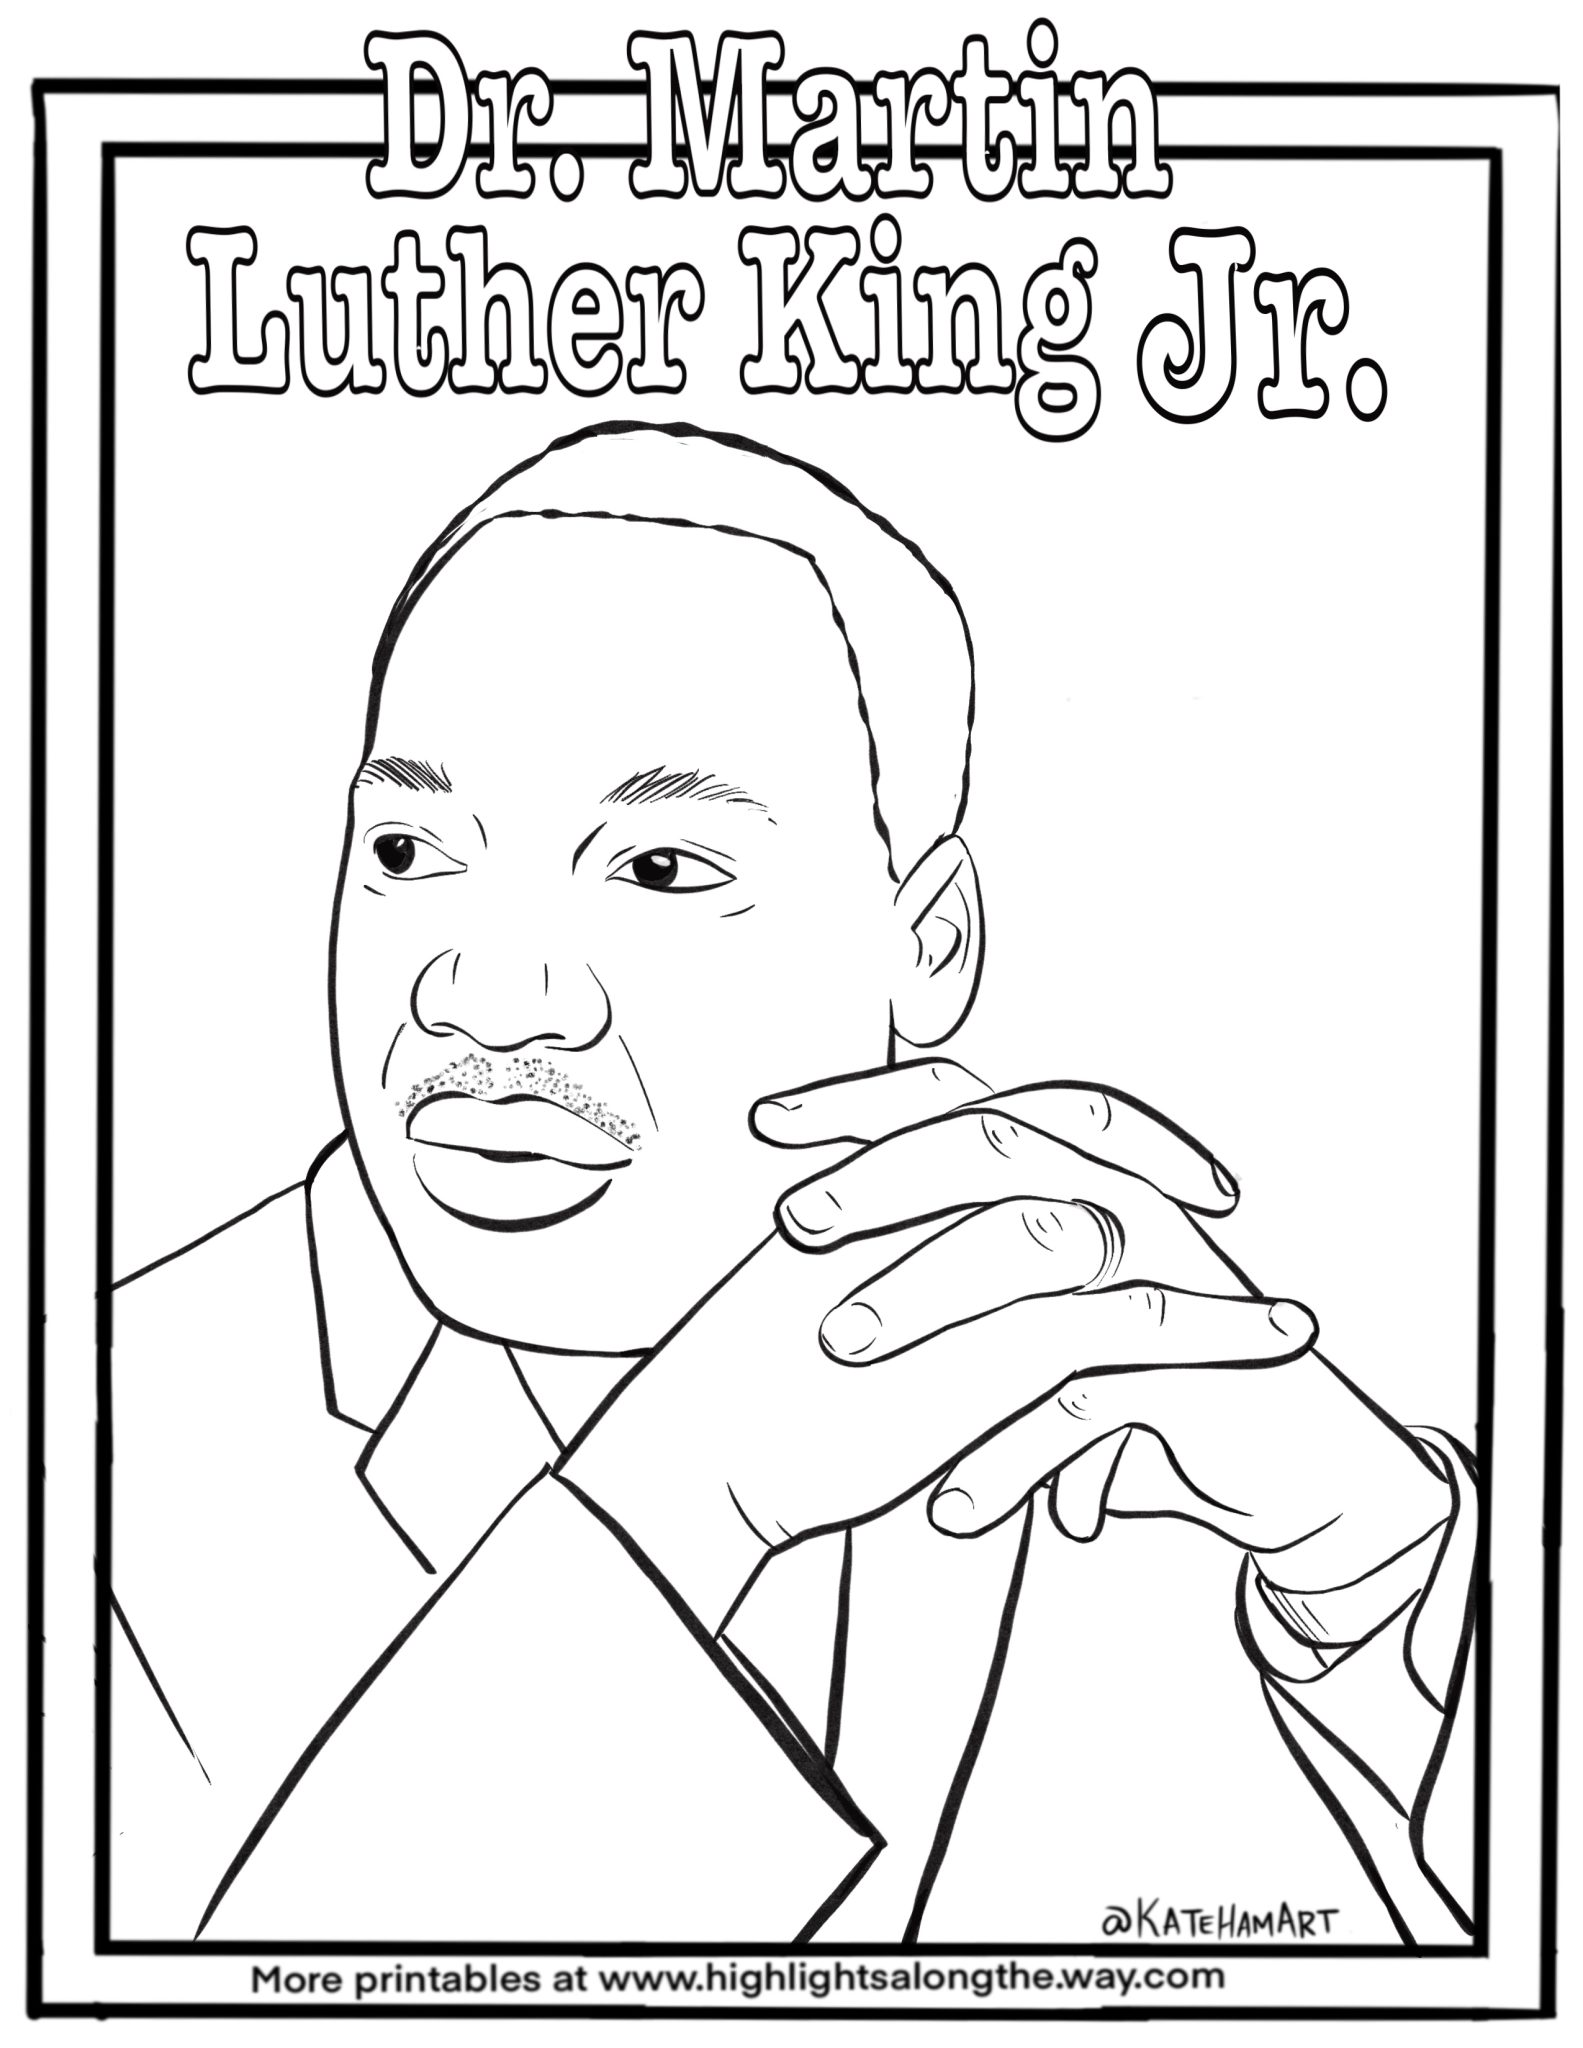 Free Printable Dr. Martin Luther King Coloring Page